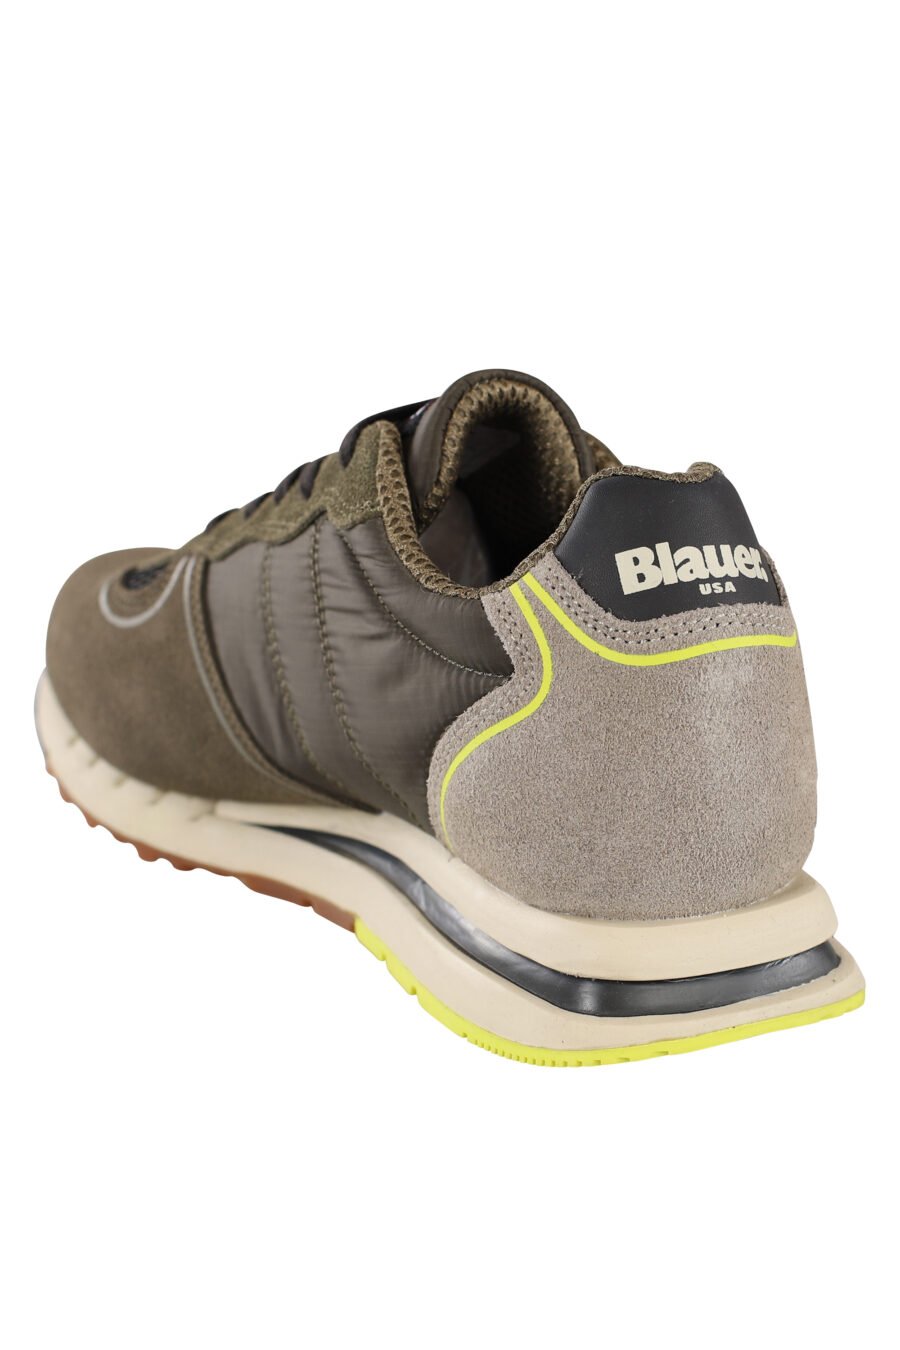 Trainers "quartz" military green multicoloured with breathable mesh - IMG 6834